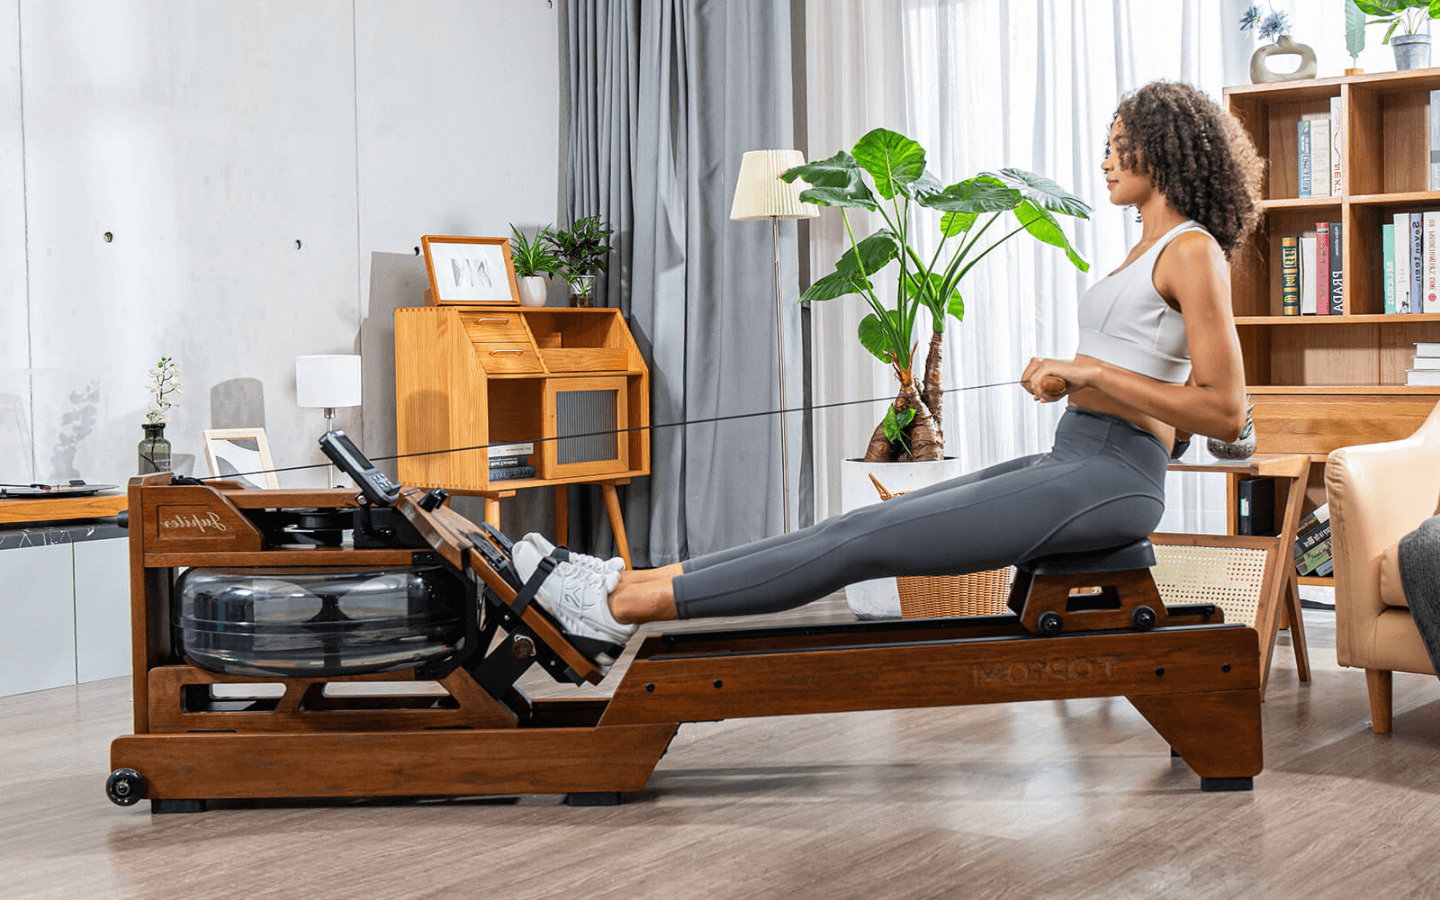 Water Rowing Machine: A Fitness Tool for Perfect Body